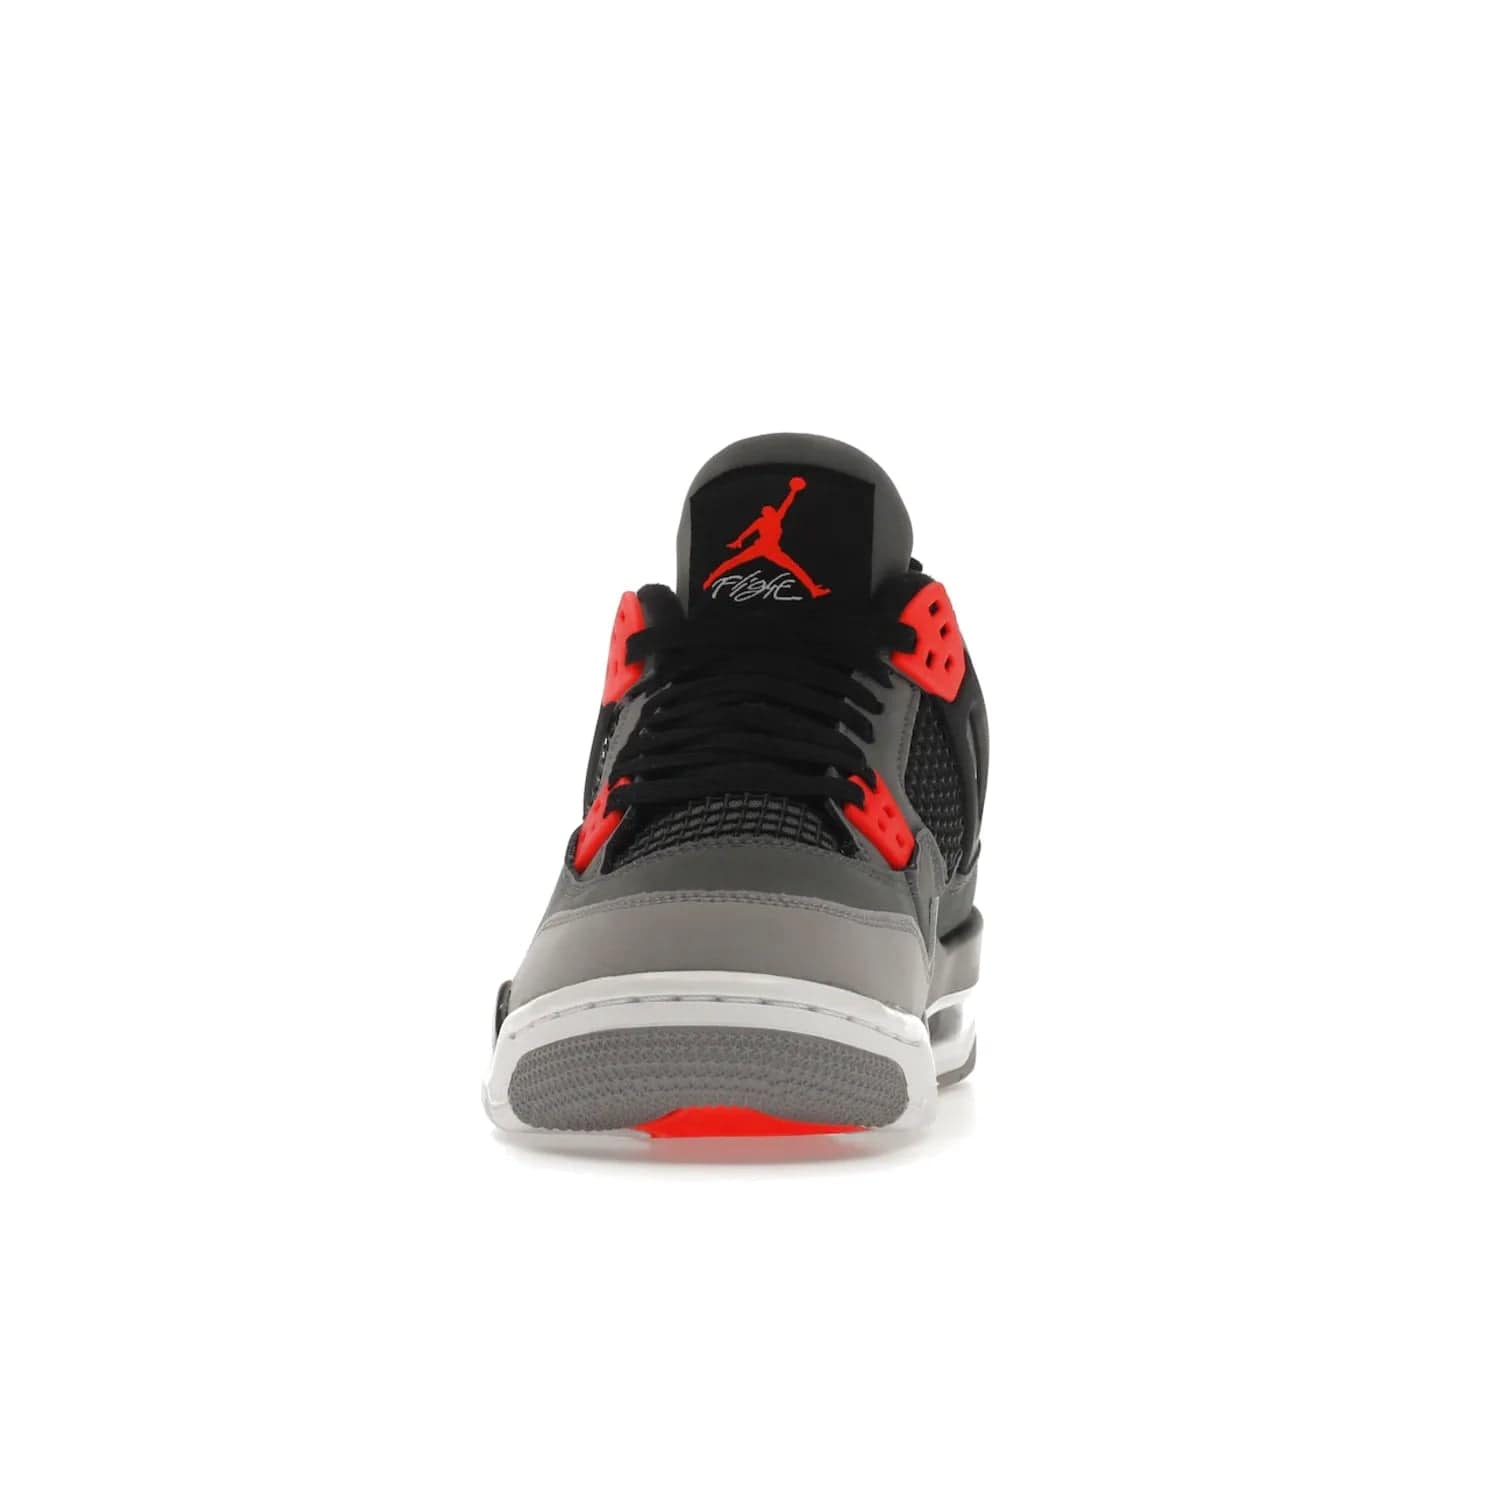 Jordan 4 Retro Infrared (GS) - Image 11 - Only at www.BallersClubKickz.com - Shop the Air Jordan 4 Retro Infrared (GS) for a classic silhouette with subtle yet bold features. Dark grey nubuck upper with lighter forefoot overlay, black accents, Infrared molded eyelets & woven tongue tag. Available June 2022.